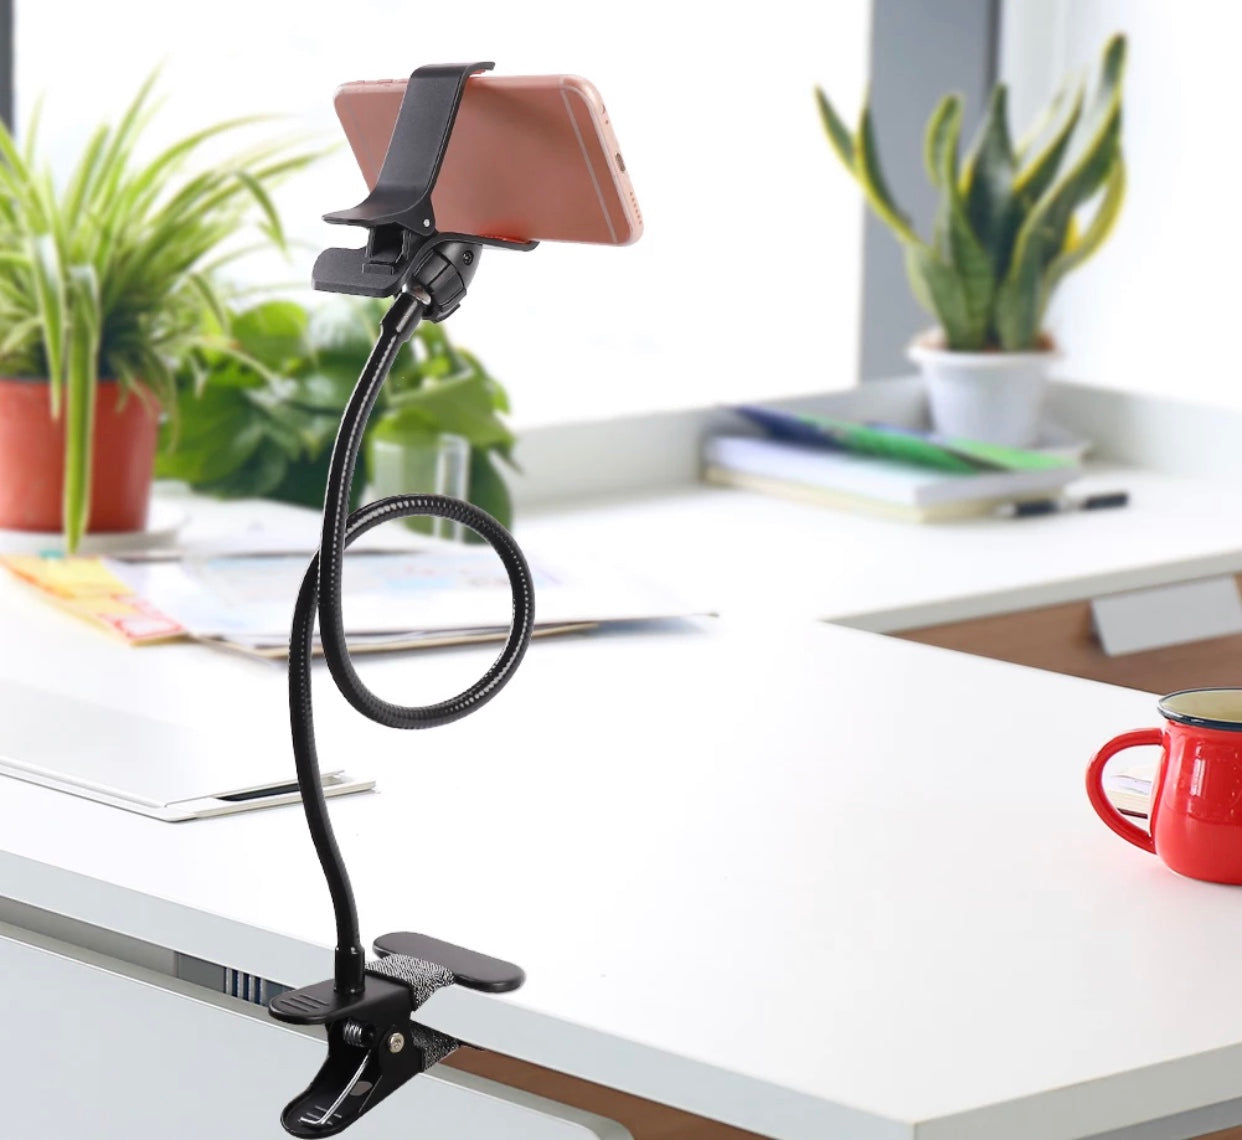 Phone Holder Adjustable Gooseneck 360 Degrees Rotation Flexible to adjust the position at an ideal distance and comfortable angle for easy viewing.